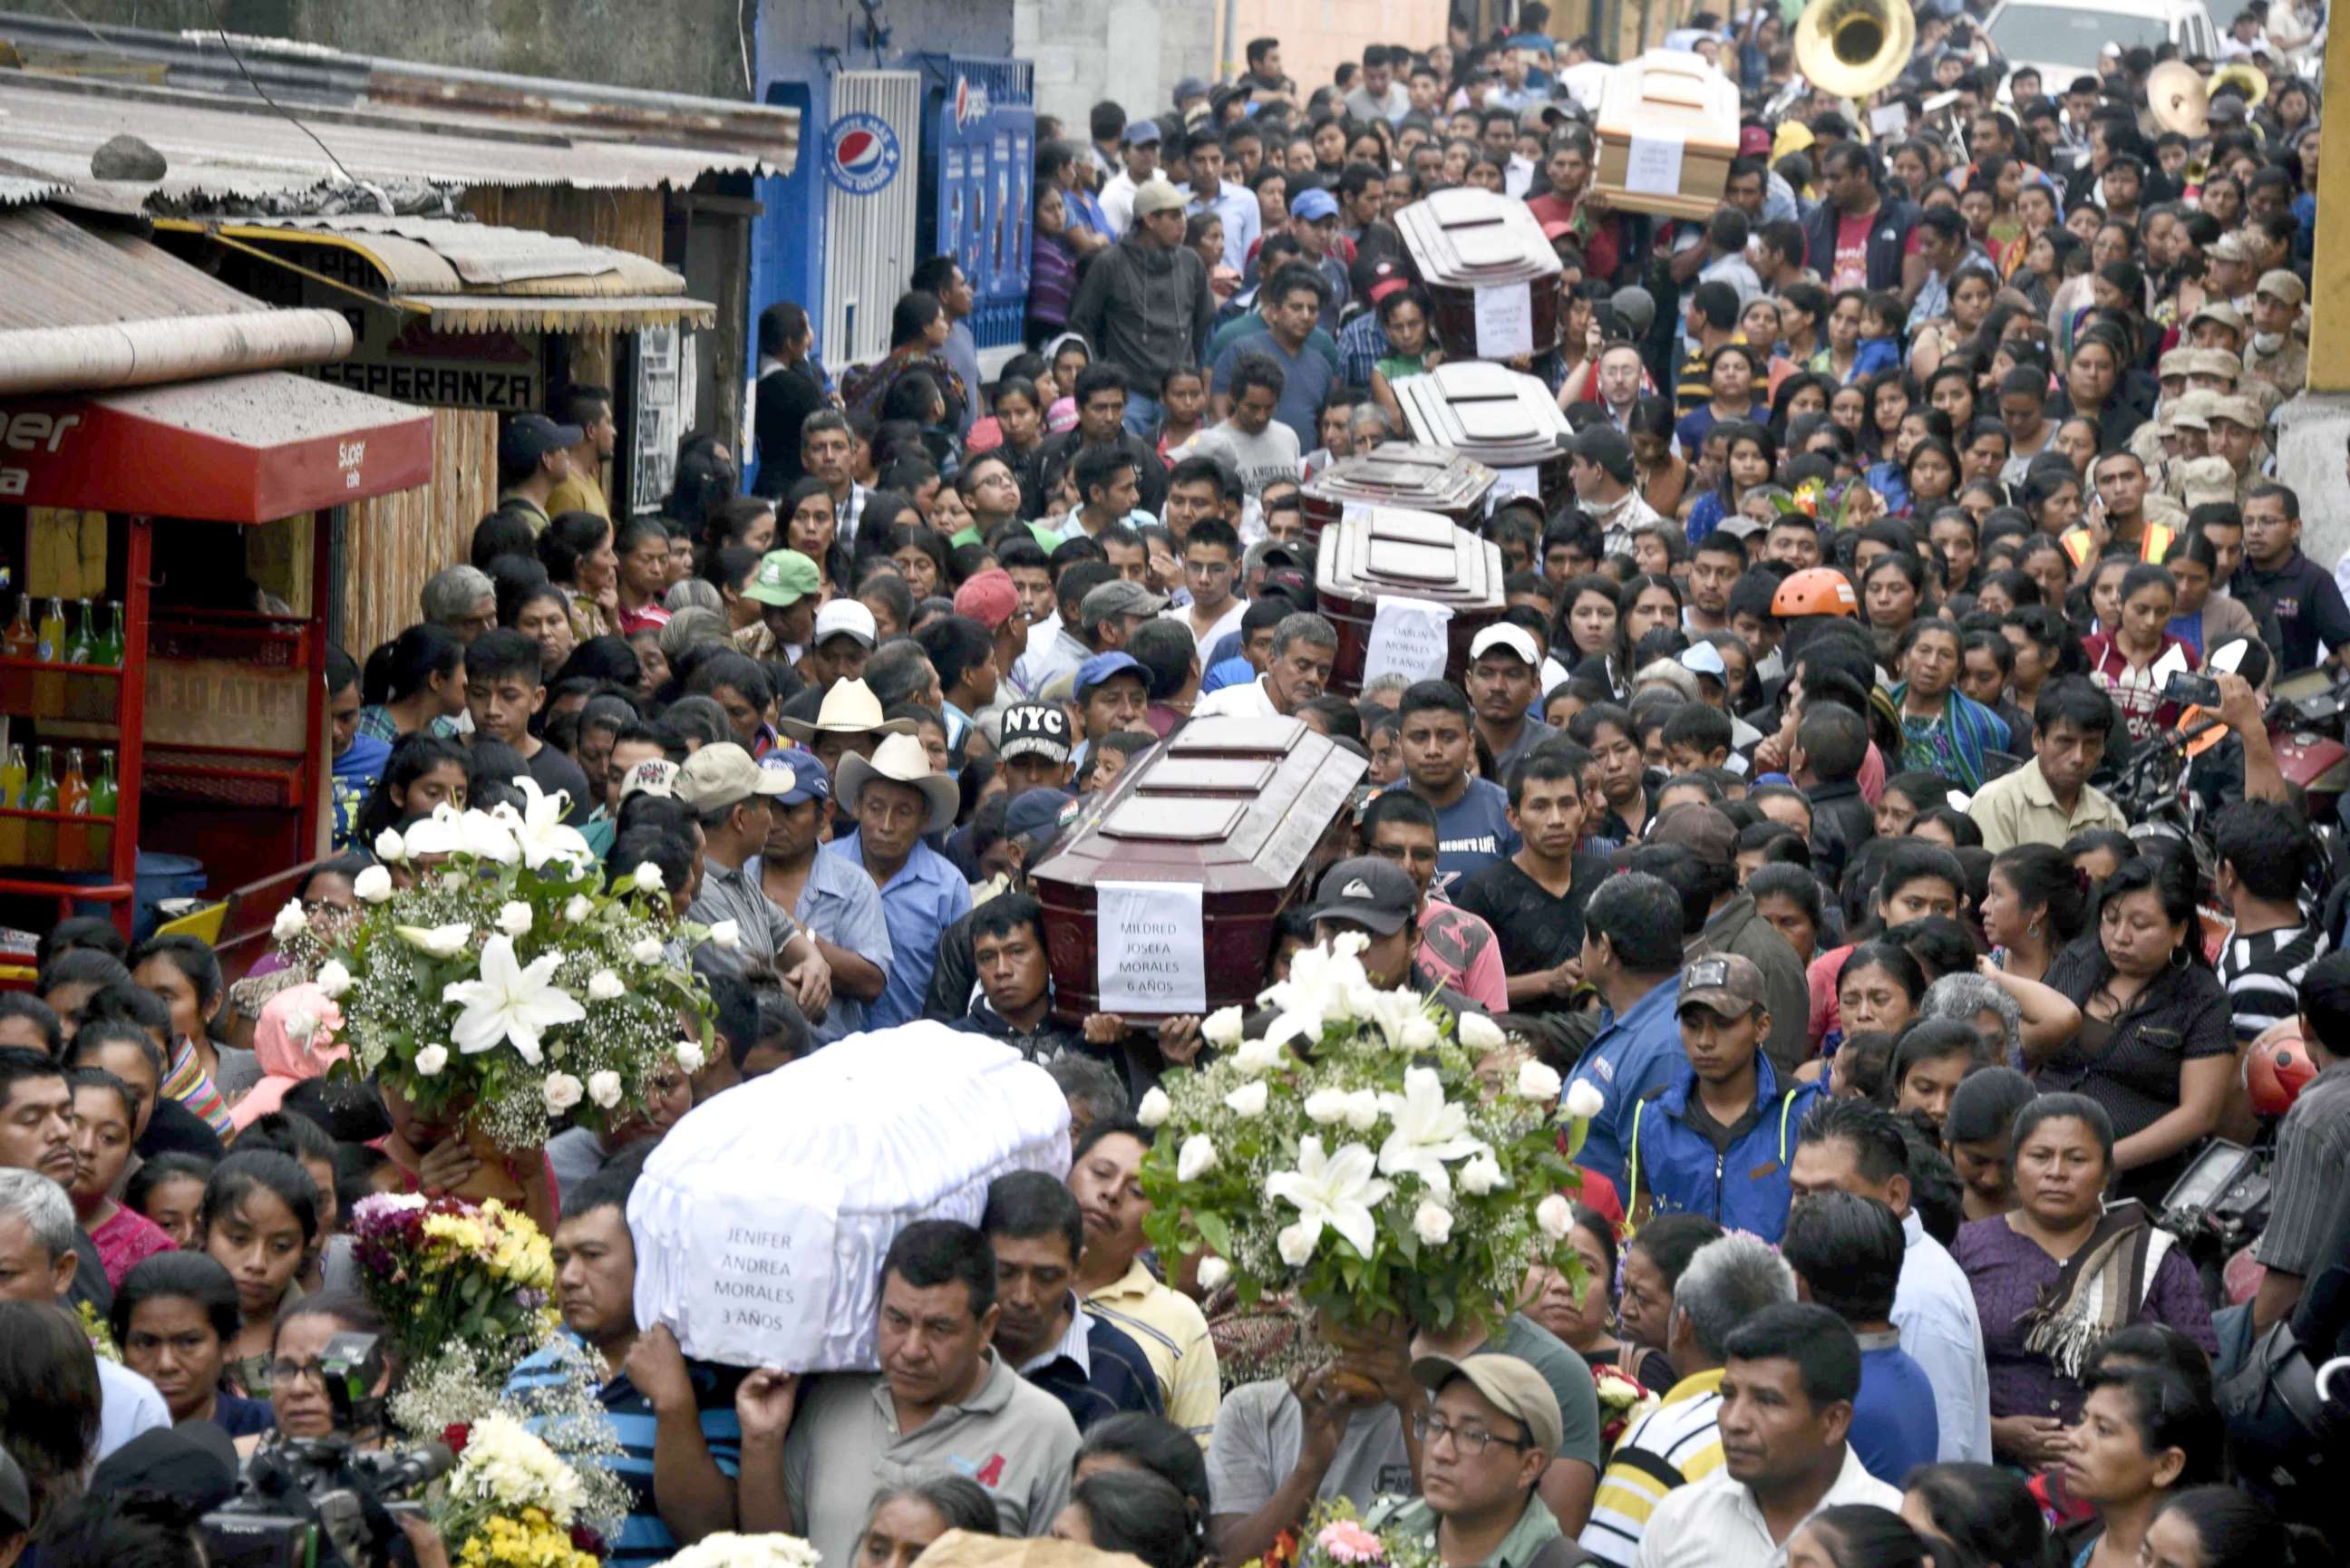 PHOTO: Residents carry the coffins of seven people who died following the eruption of the Fuego volcano, along the streets of Alotenango municipality, Sacatepequez, about 40 miles southwest of Guatemala City, June 4, 2018.